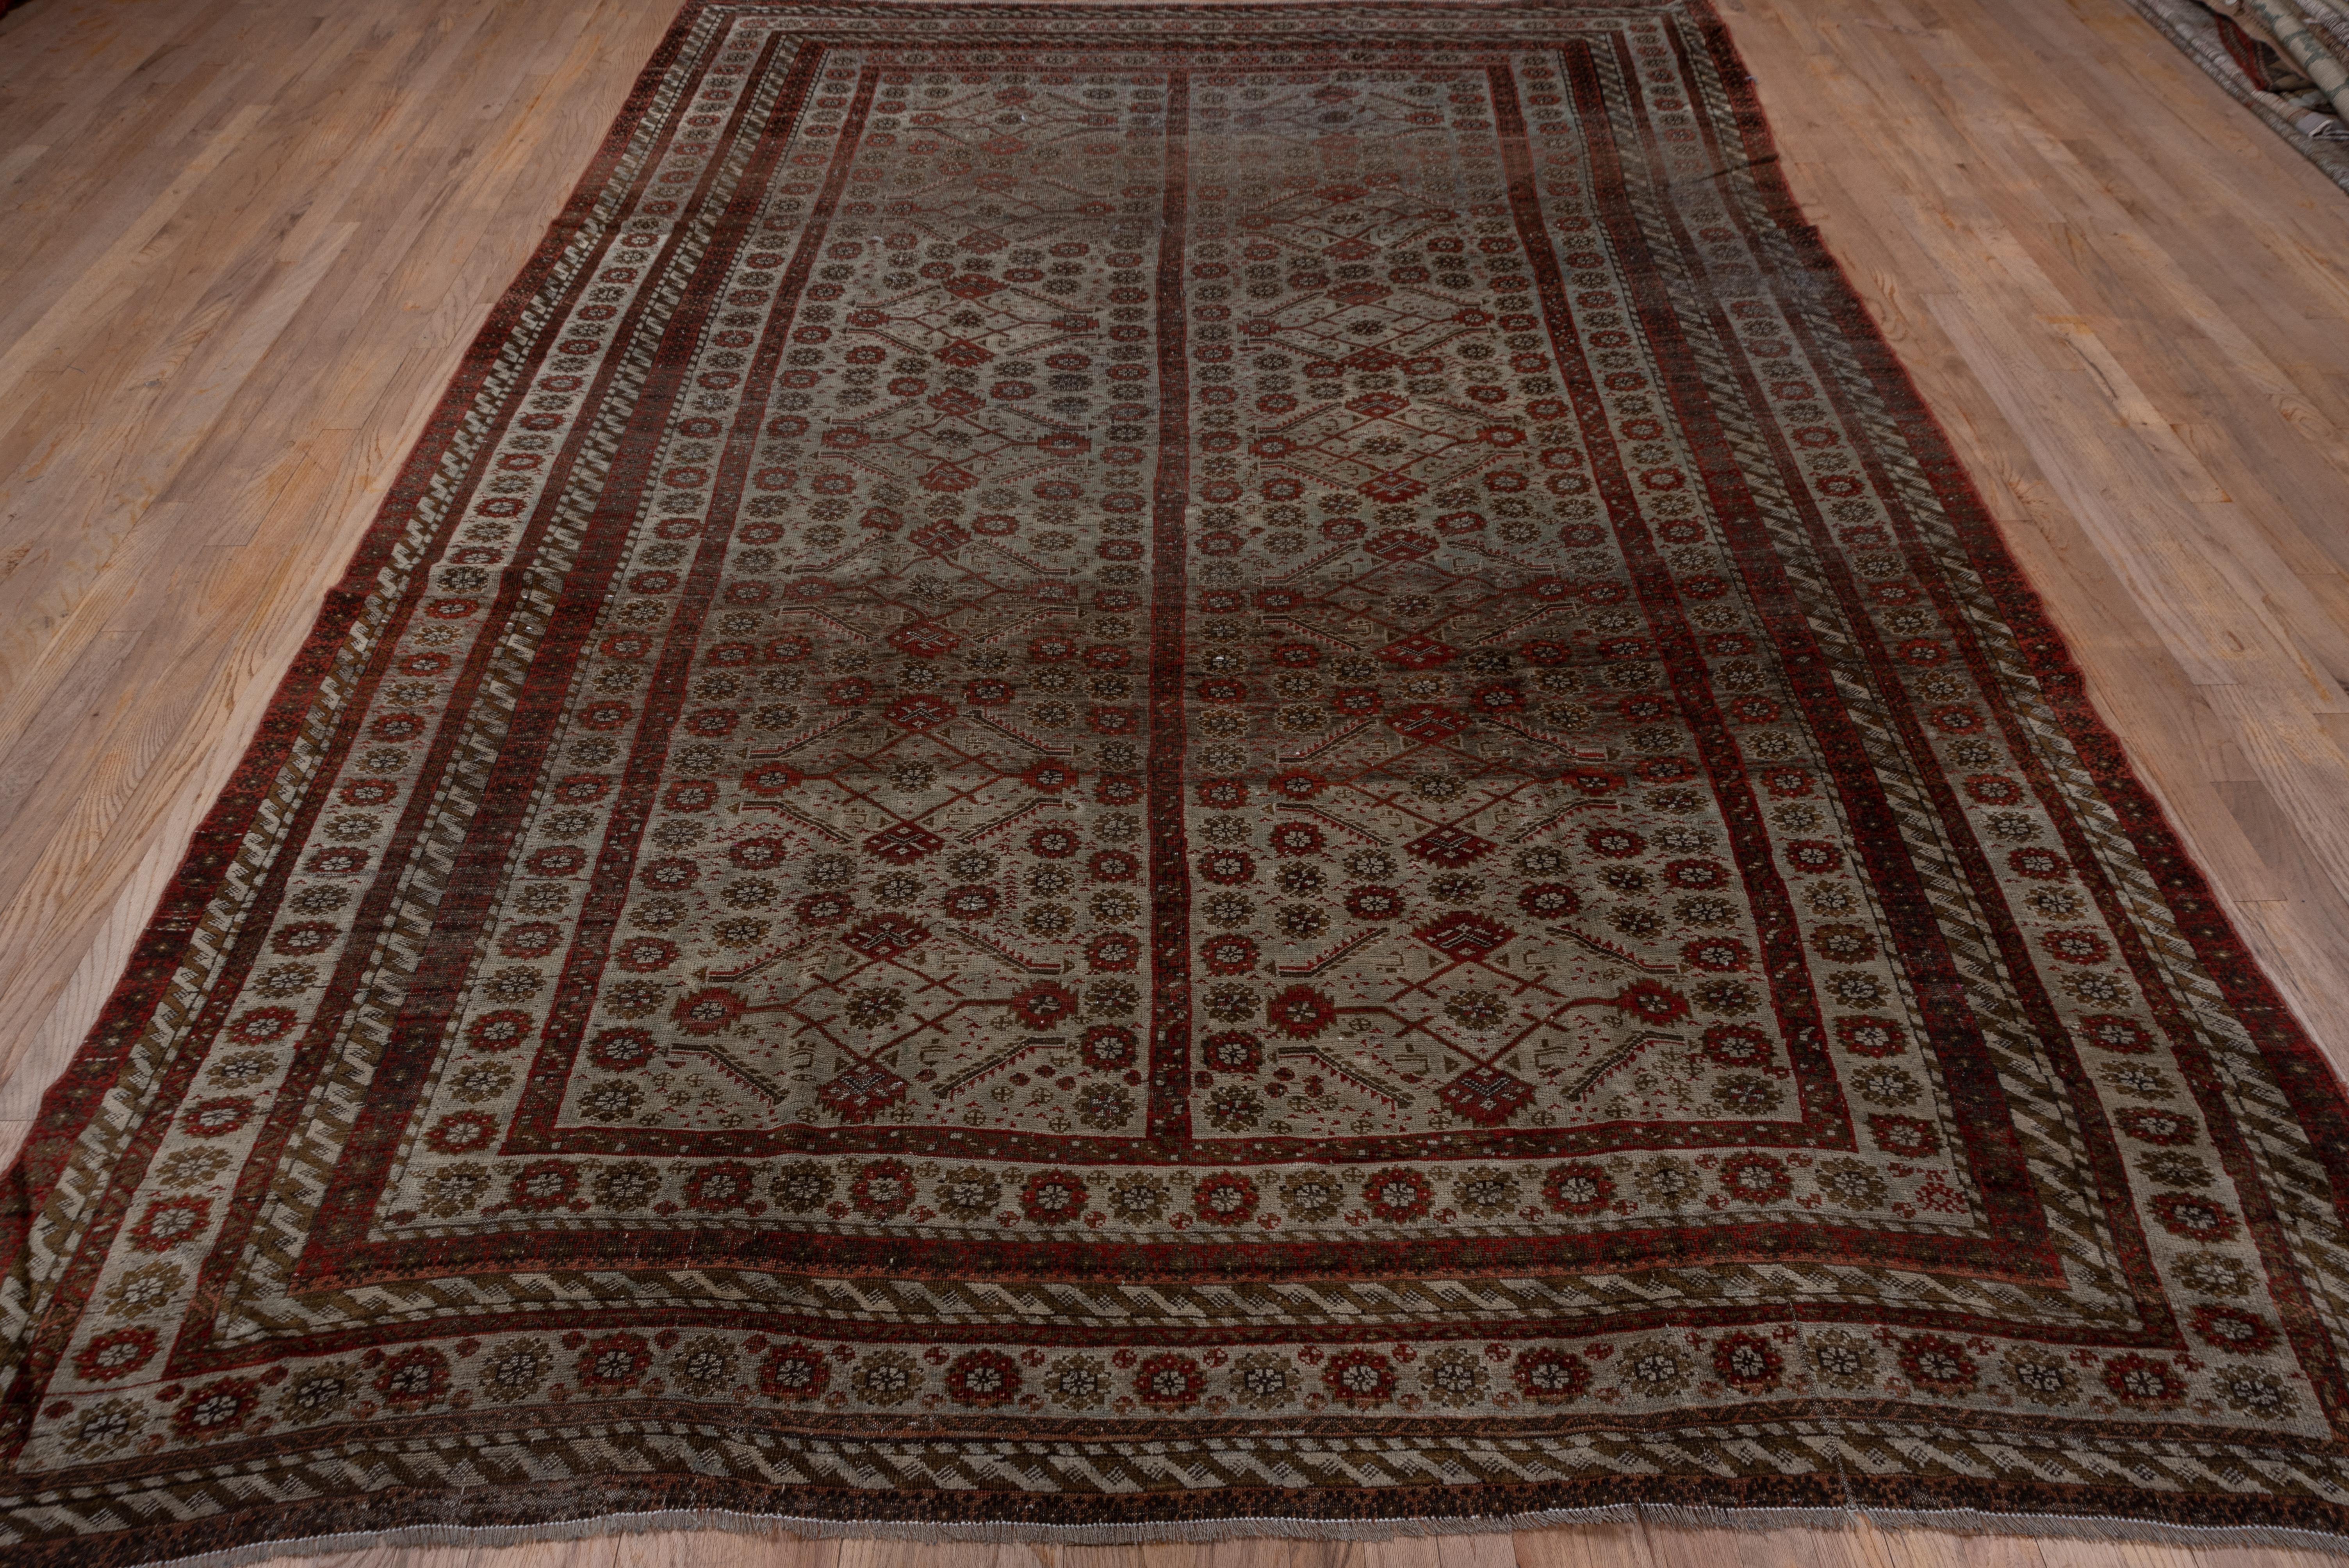 The two panel powder blue/cream field displays an abstract Herati pattern amid numerous octogramme rosettes and a few tiny animals. The borders show similar rosettes and interlocking slanted 's' designs on this NE Persian nomadic carpet.